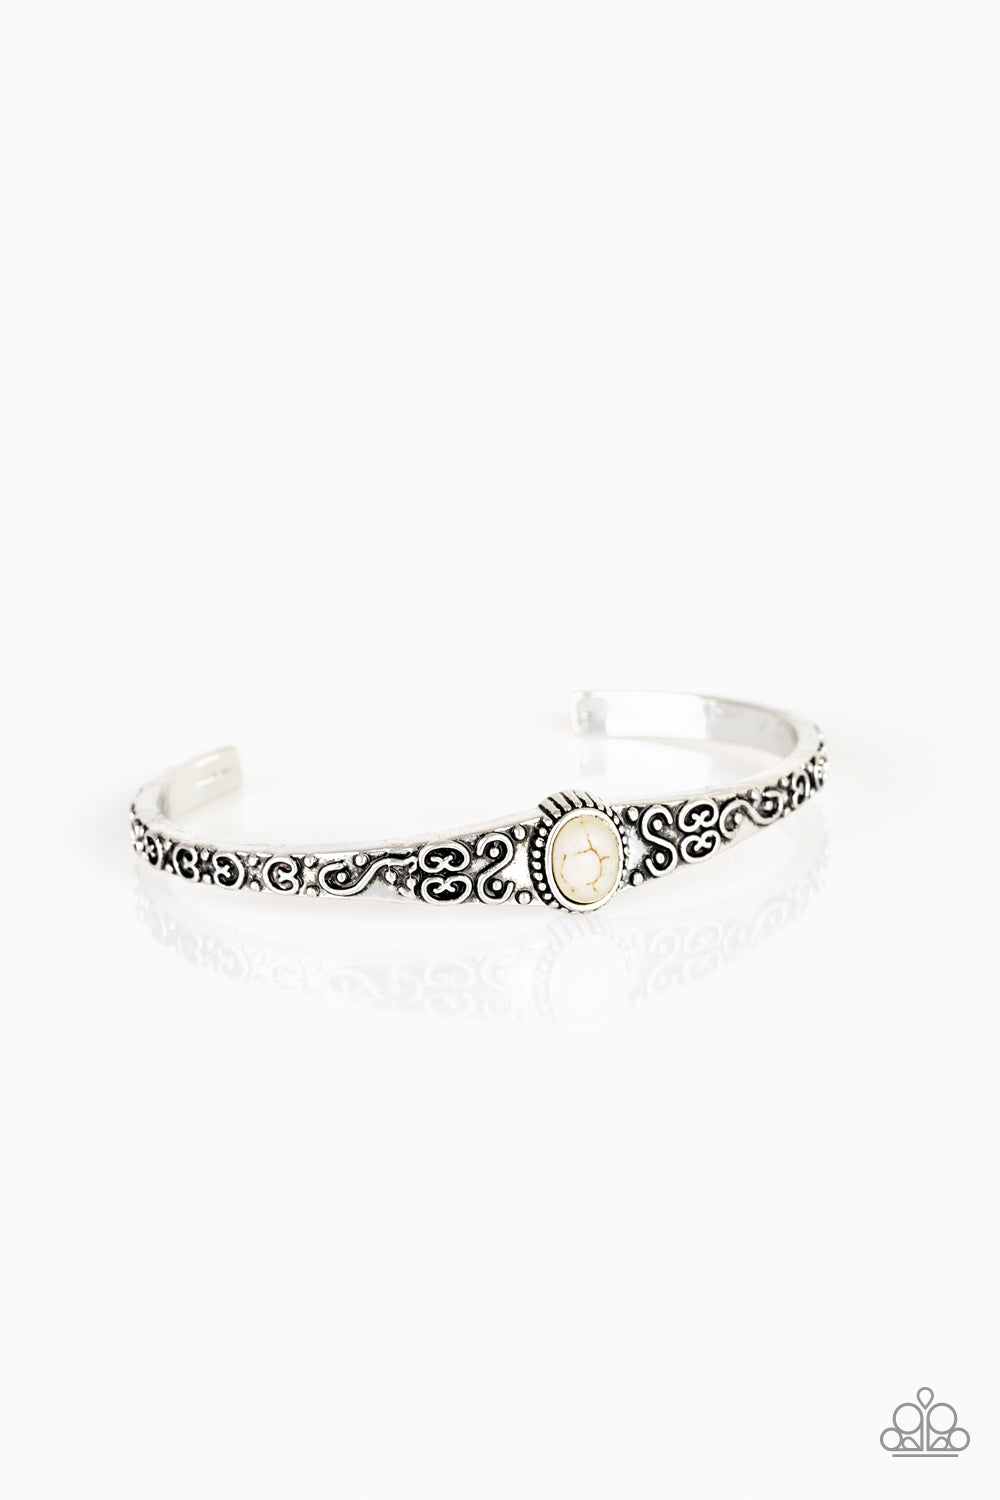 MAKE YOUR OWN PATH - WHITE SAND CRACKLE STONE TEXTURED TRIBAL CUFF BRACELET